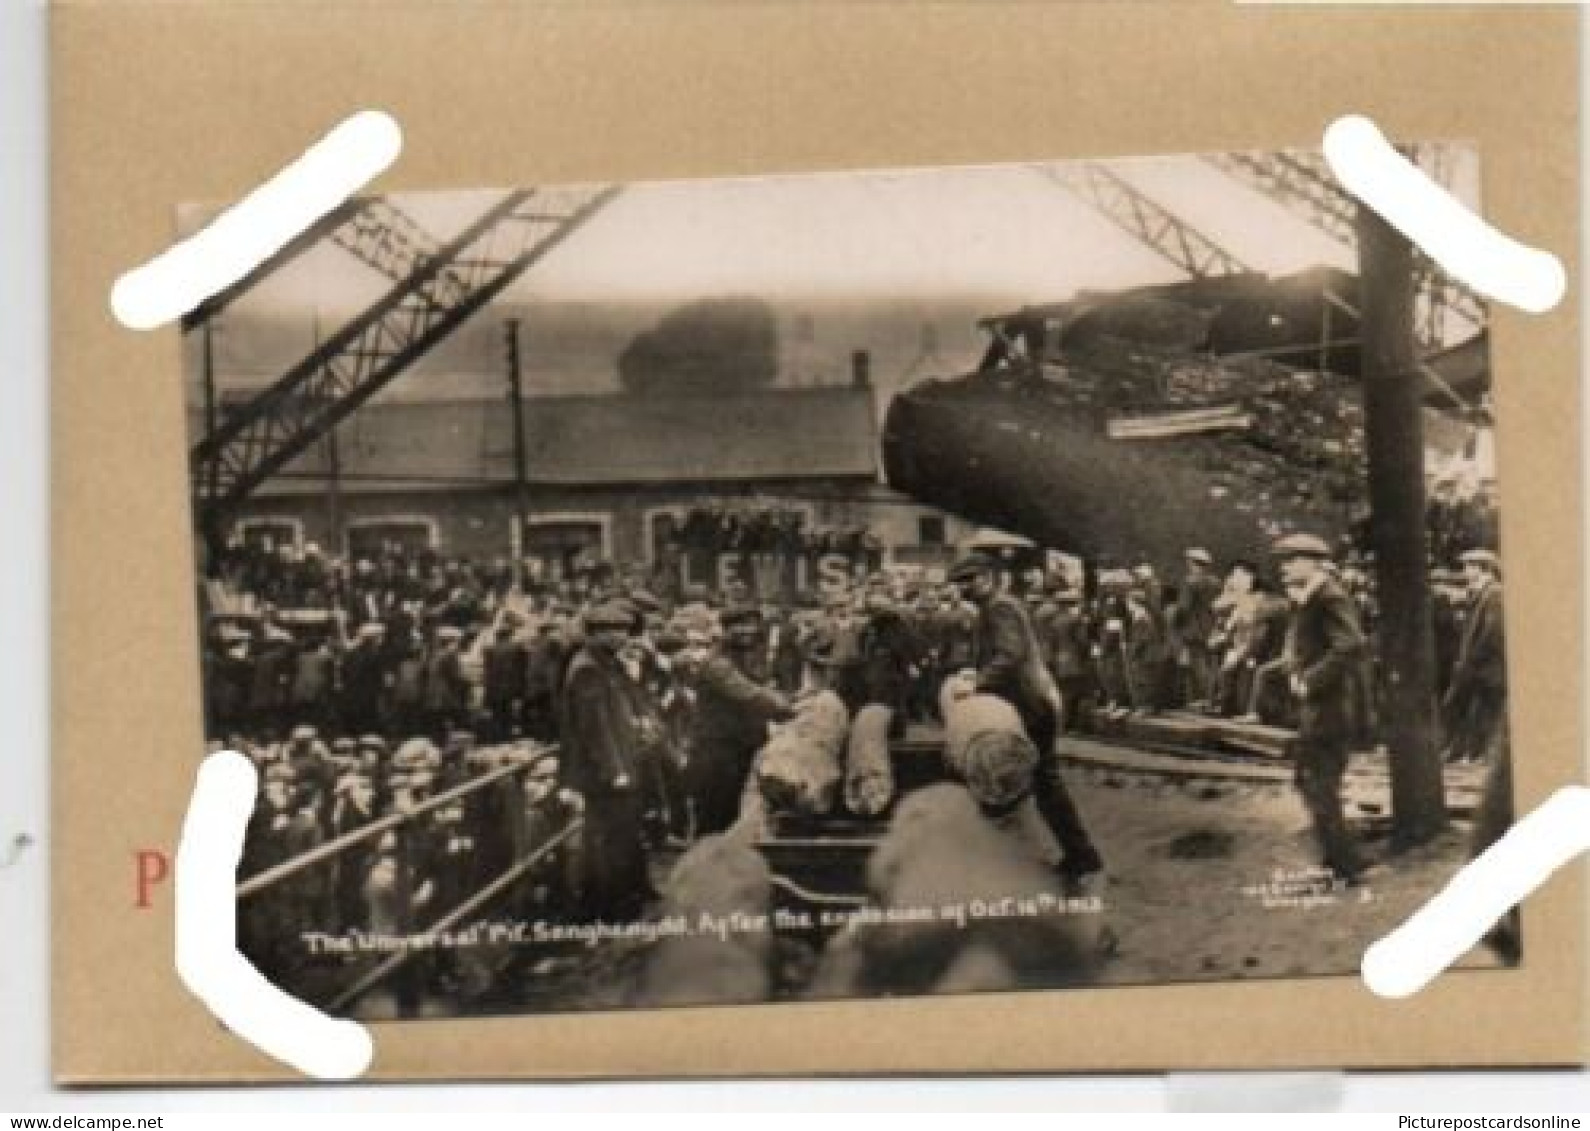 THE UNIVERSAL PIT SENGHENYDD AFTER EXPLOSION OLD R/P POSTCARD WALES COAL MINING DISASTER - Glamorgan